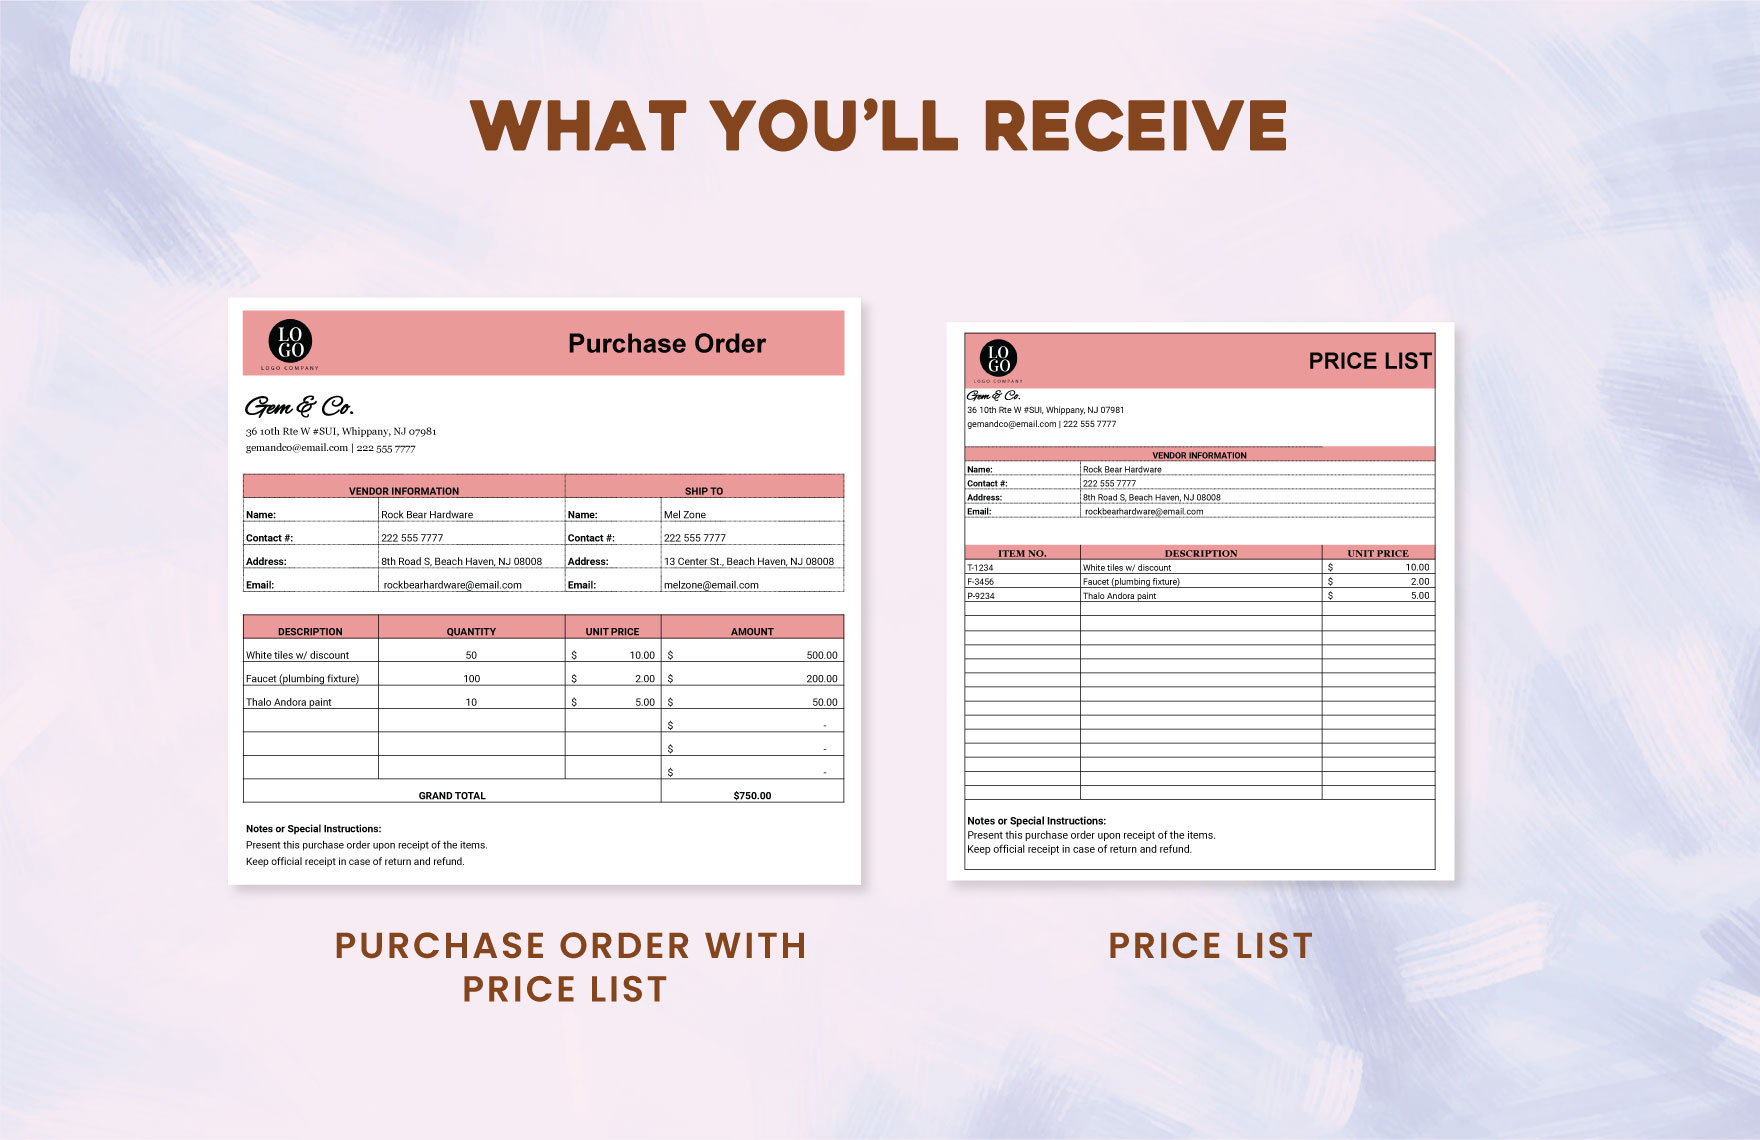 Purchase Order with Price List